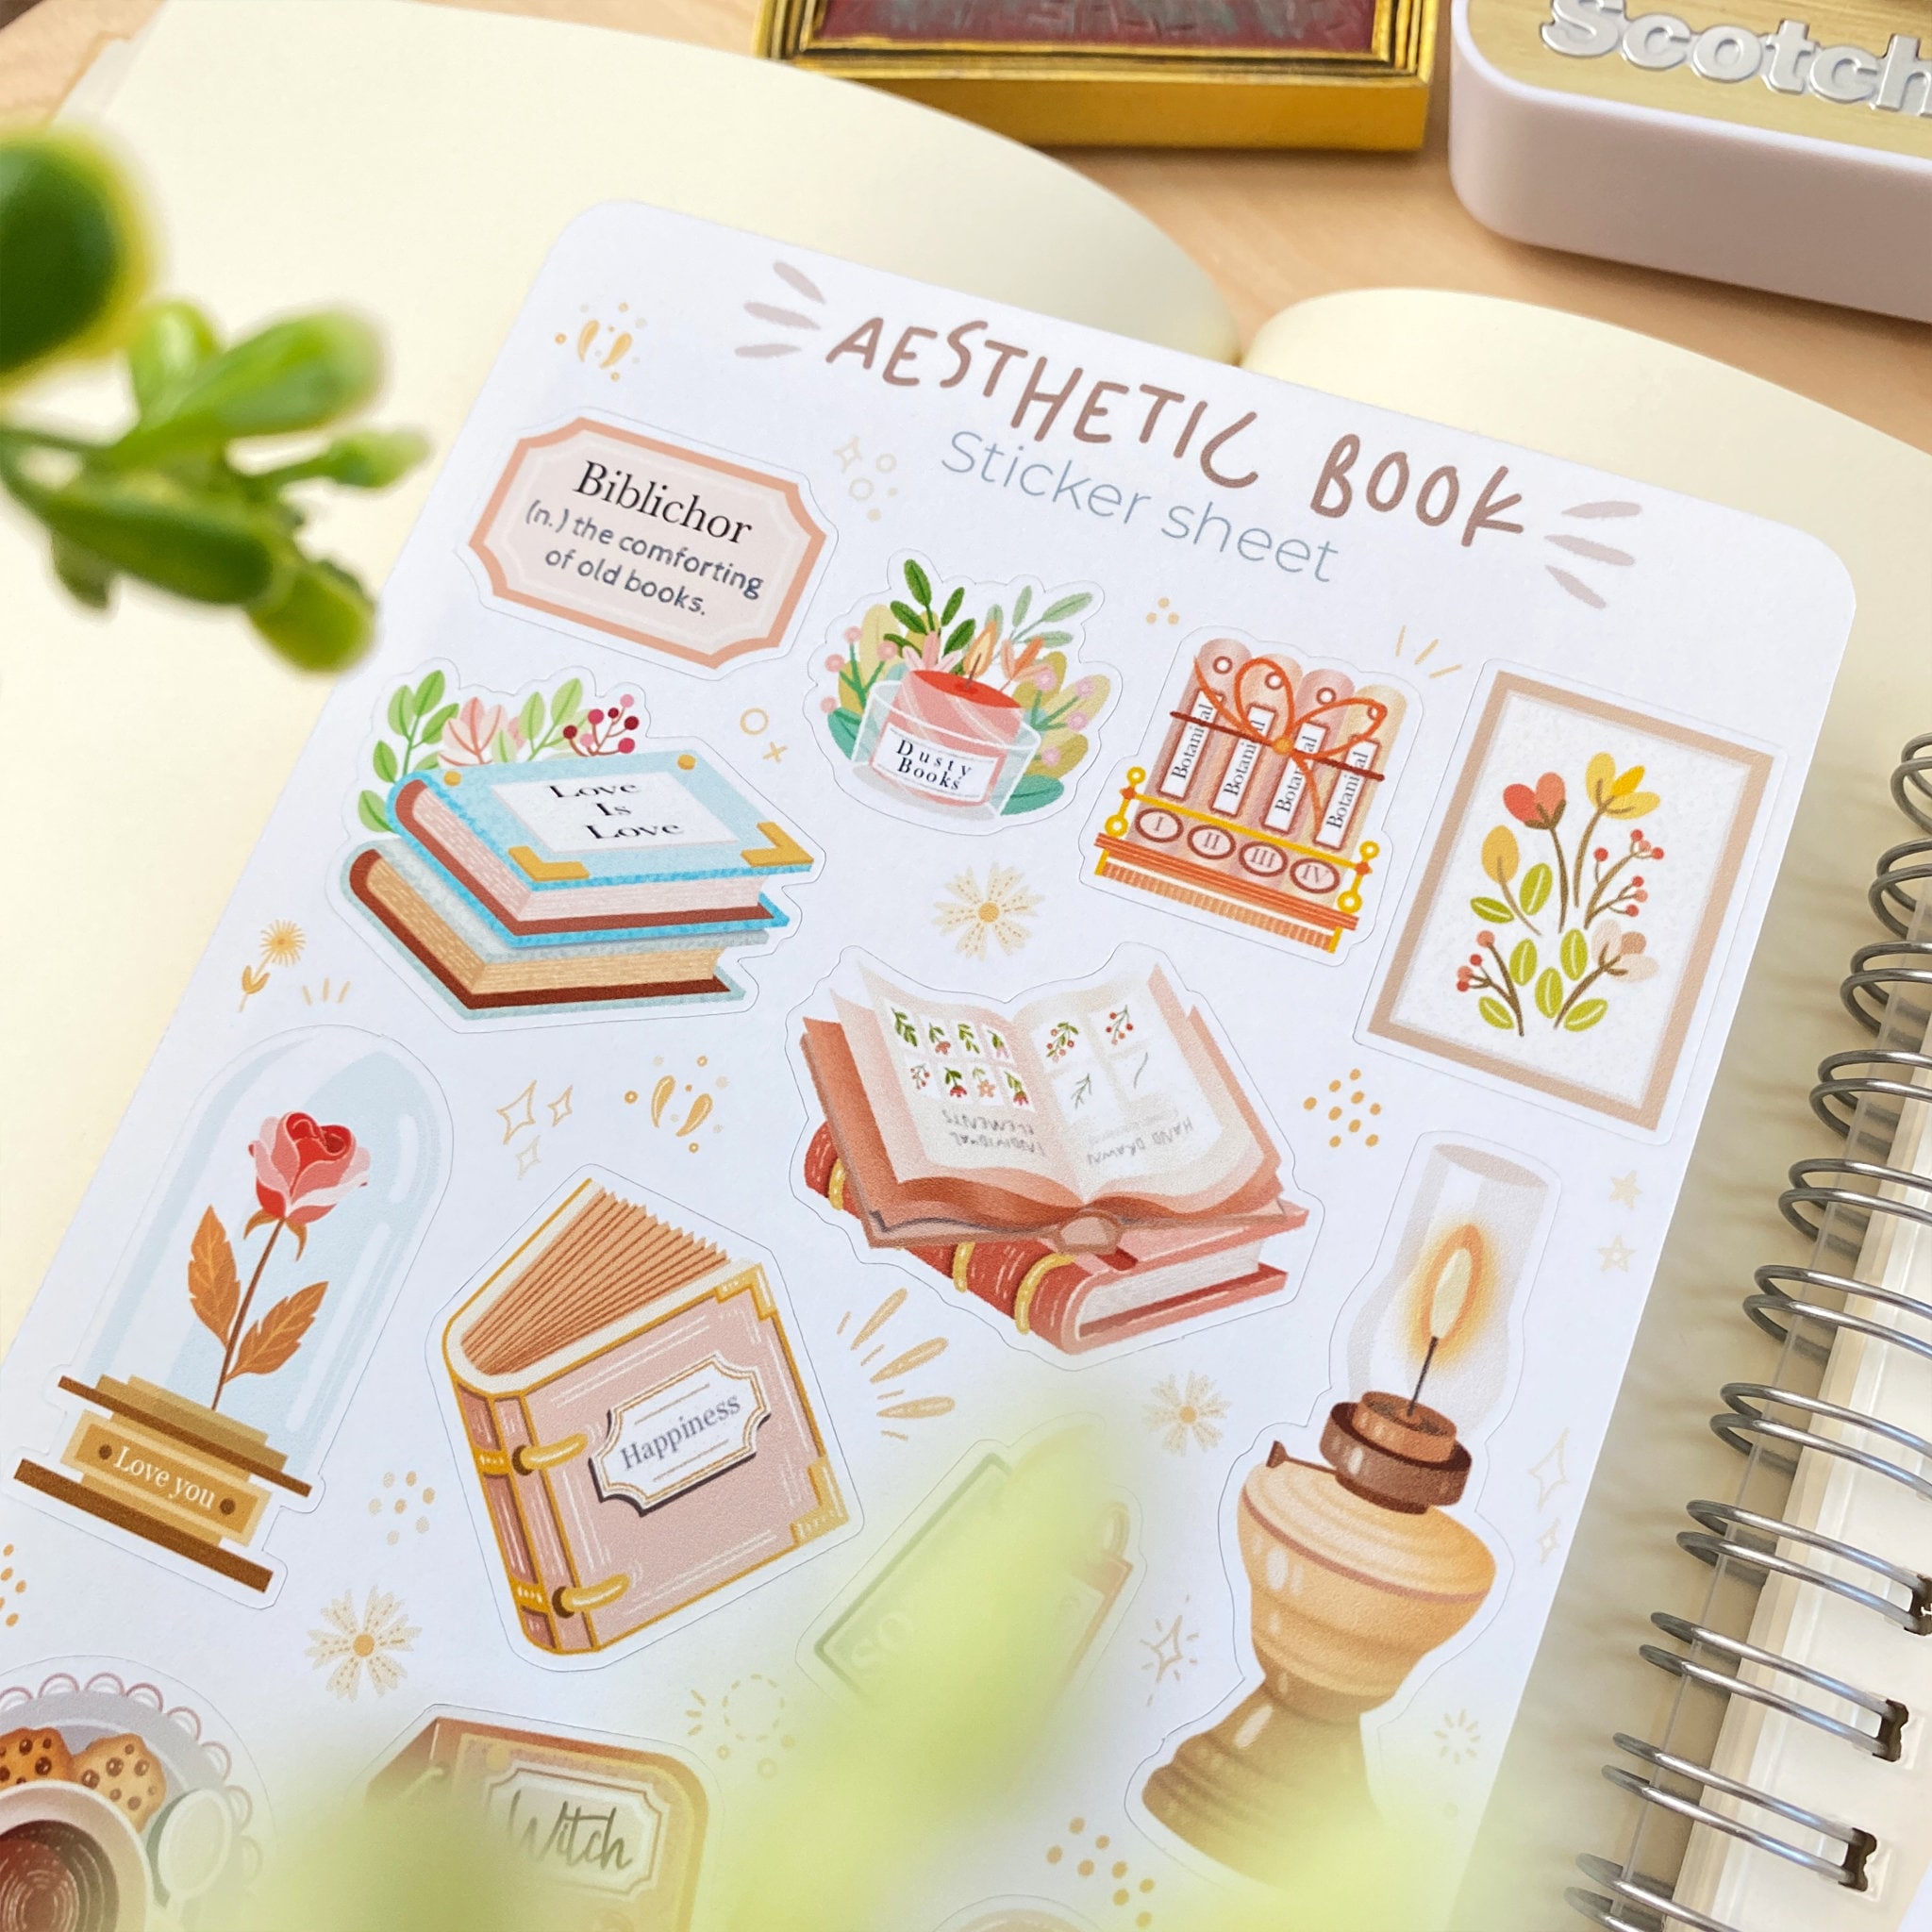 Aesthetic neutral journal stickers  Sticker for Sale by hollyrogers